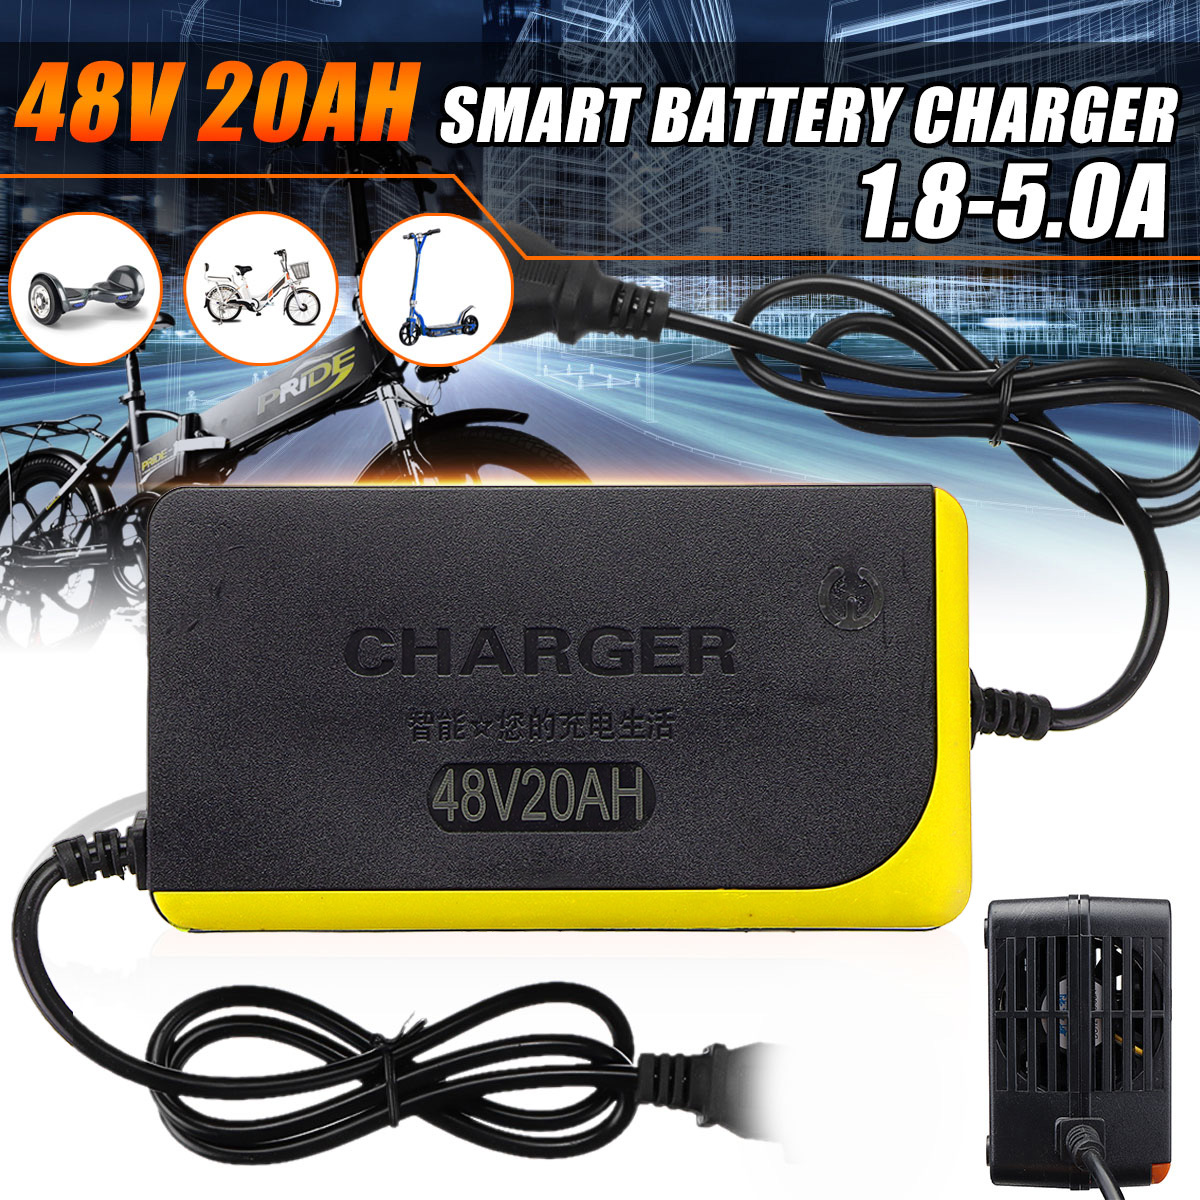 48V-20AH-18-50A-Electric-Bike-Scooter-Lead-Acid-Battery-Charger-Power-Adapter-1670779-1